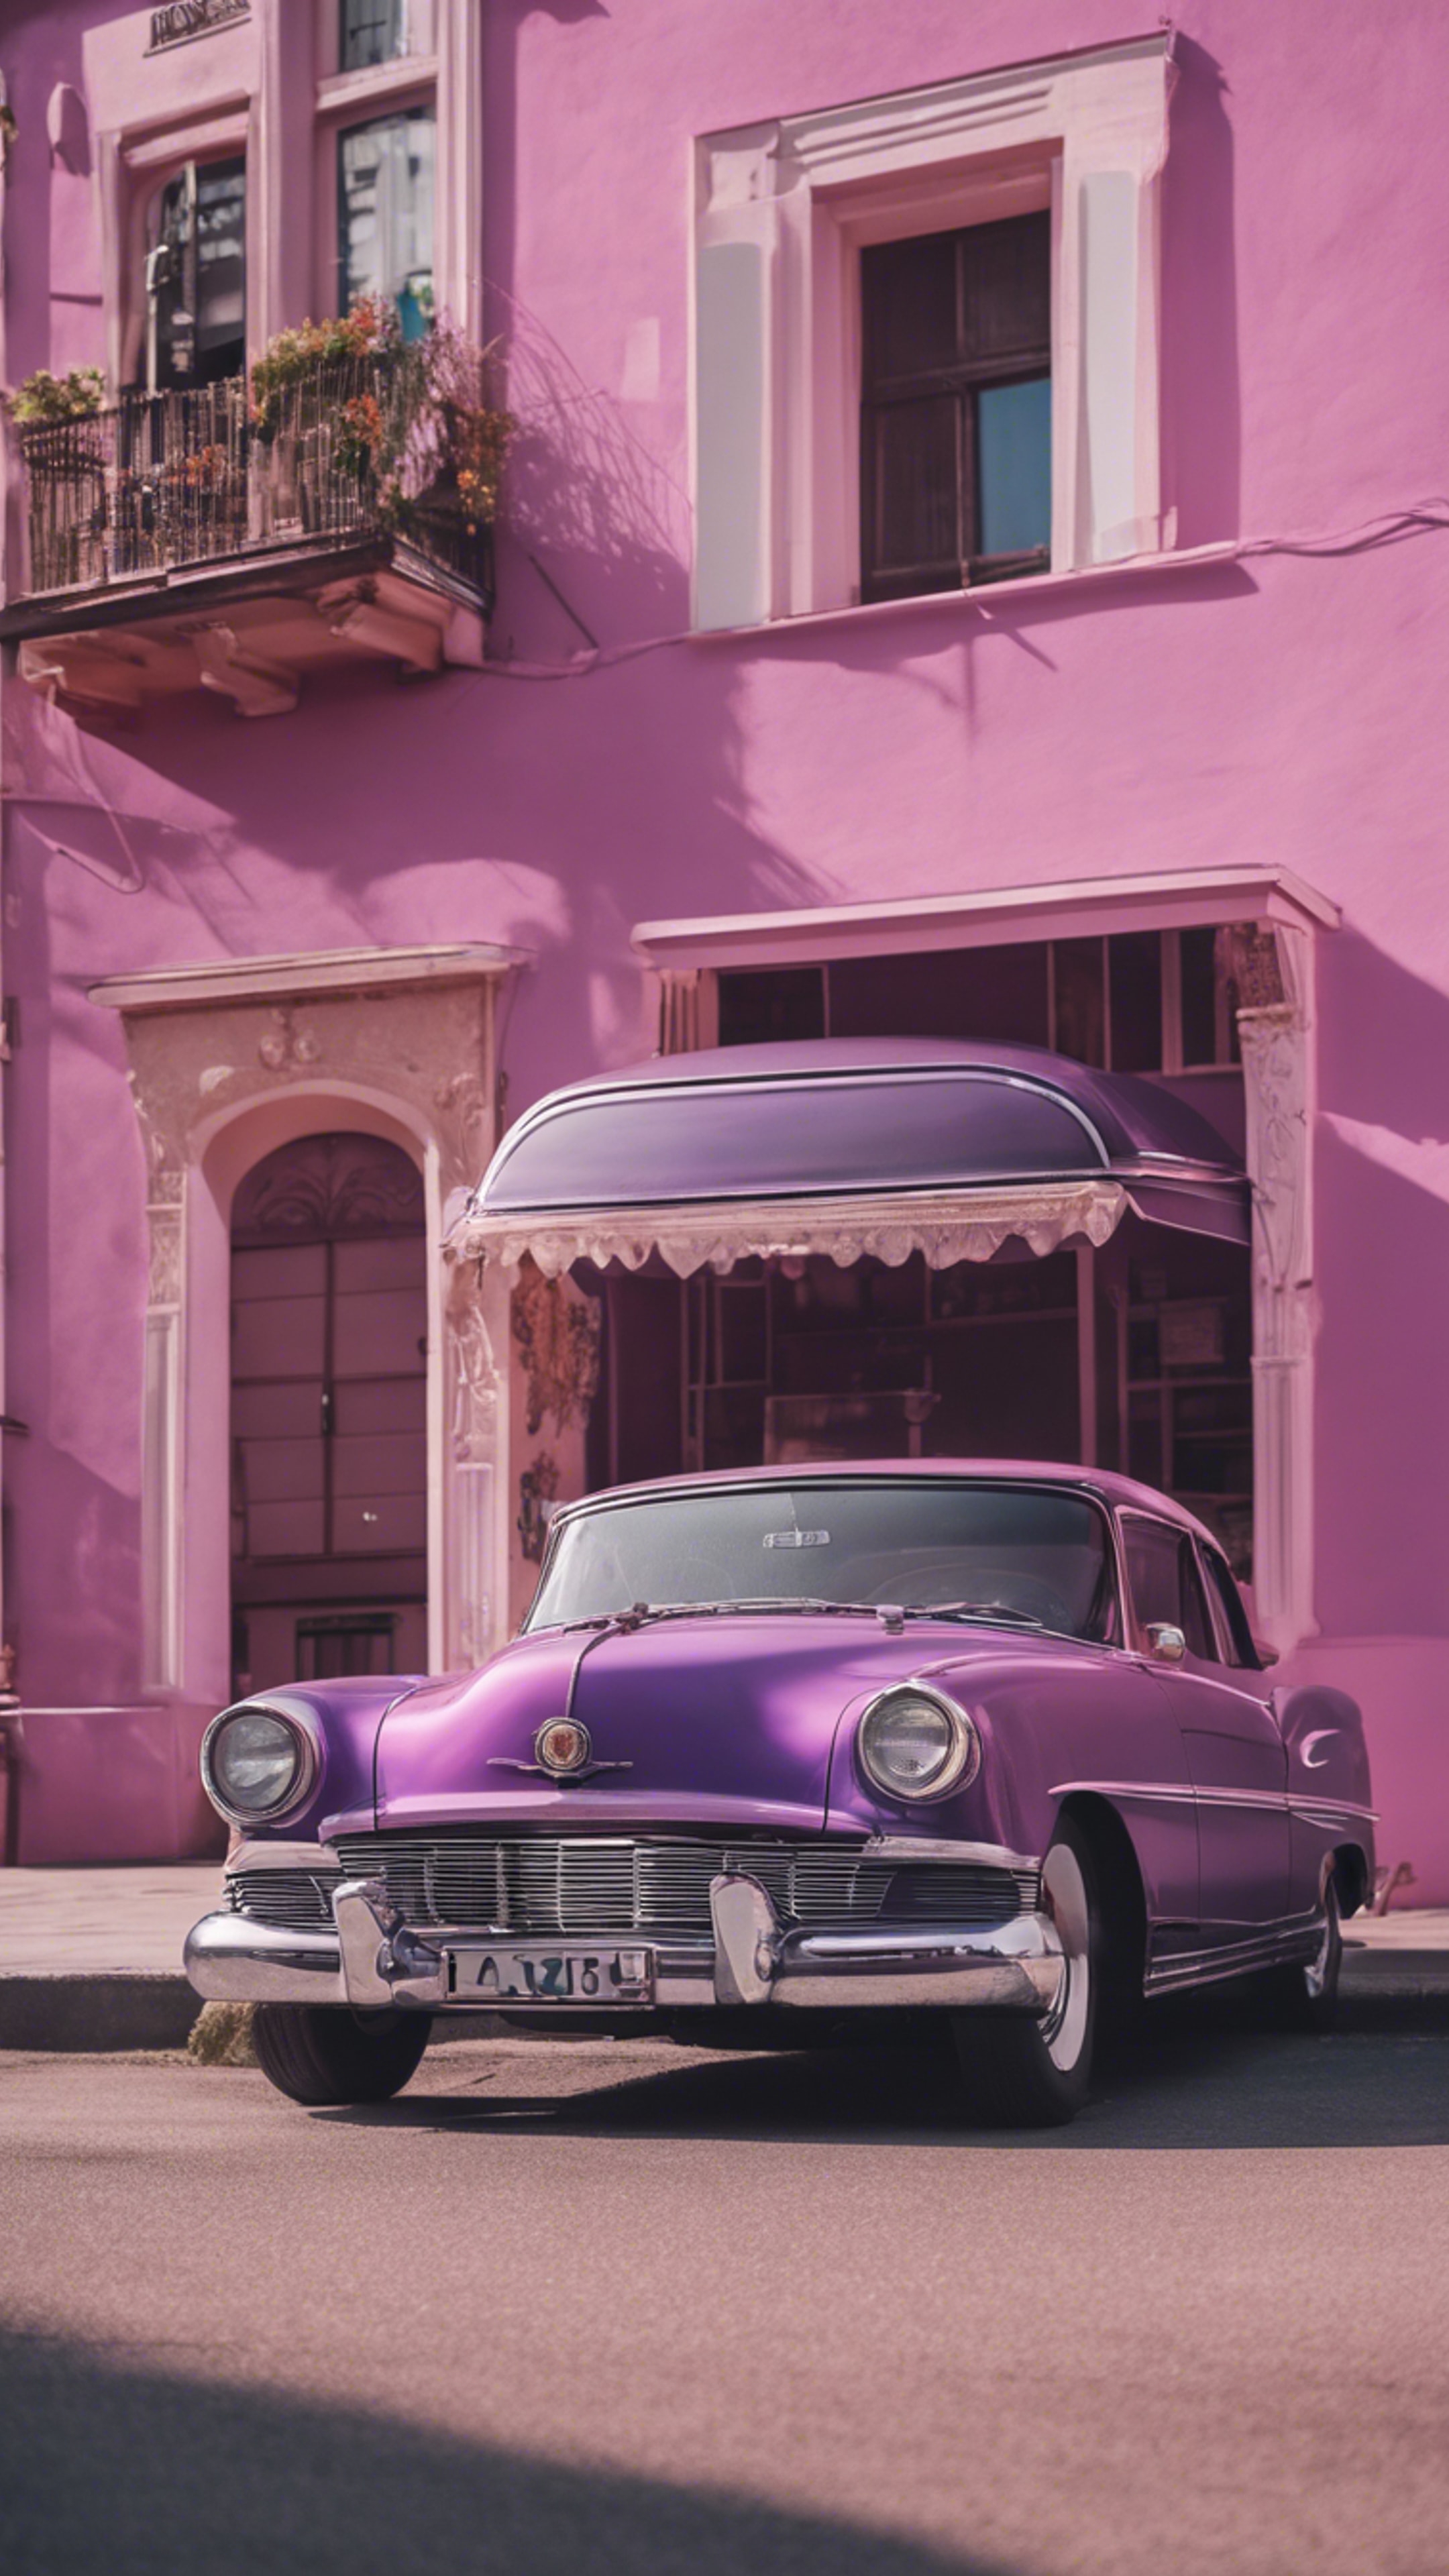 A purple vintage car parked by a pink pastel building. Тапет[f1101ed4526e489a8b1f]